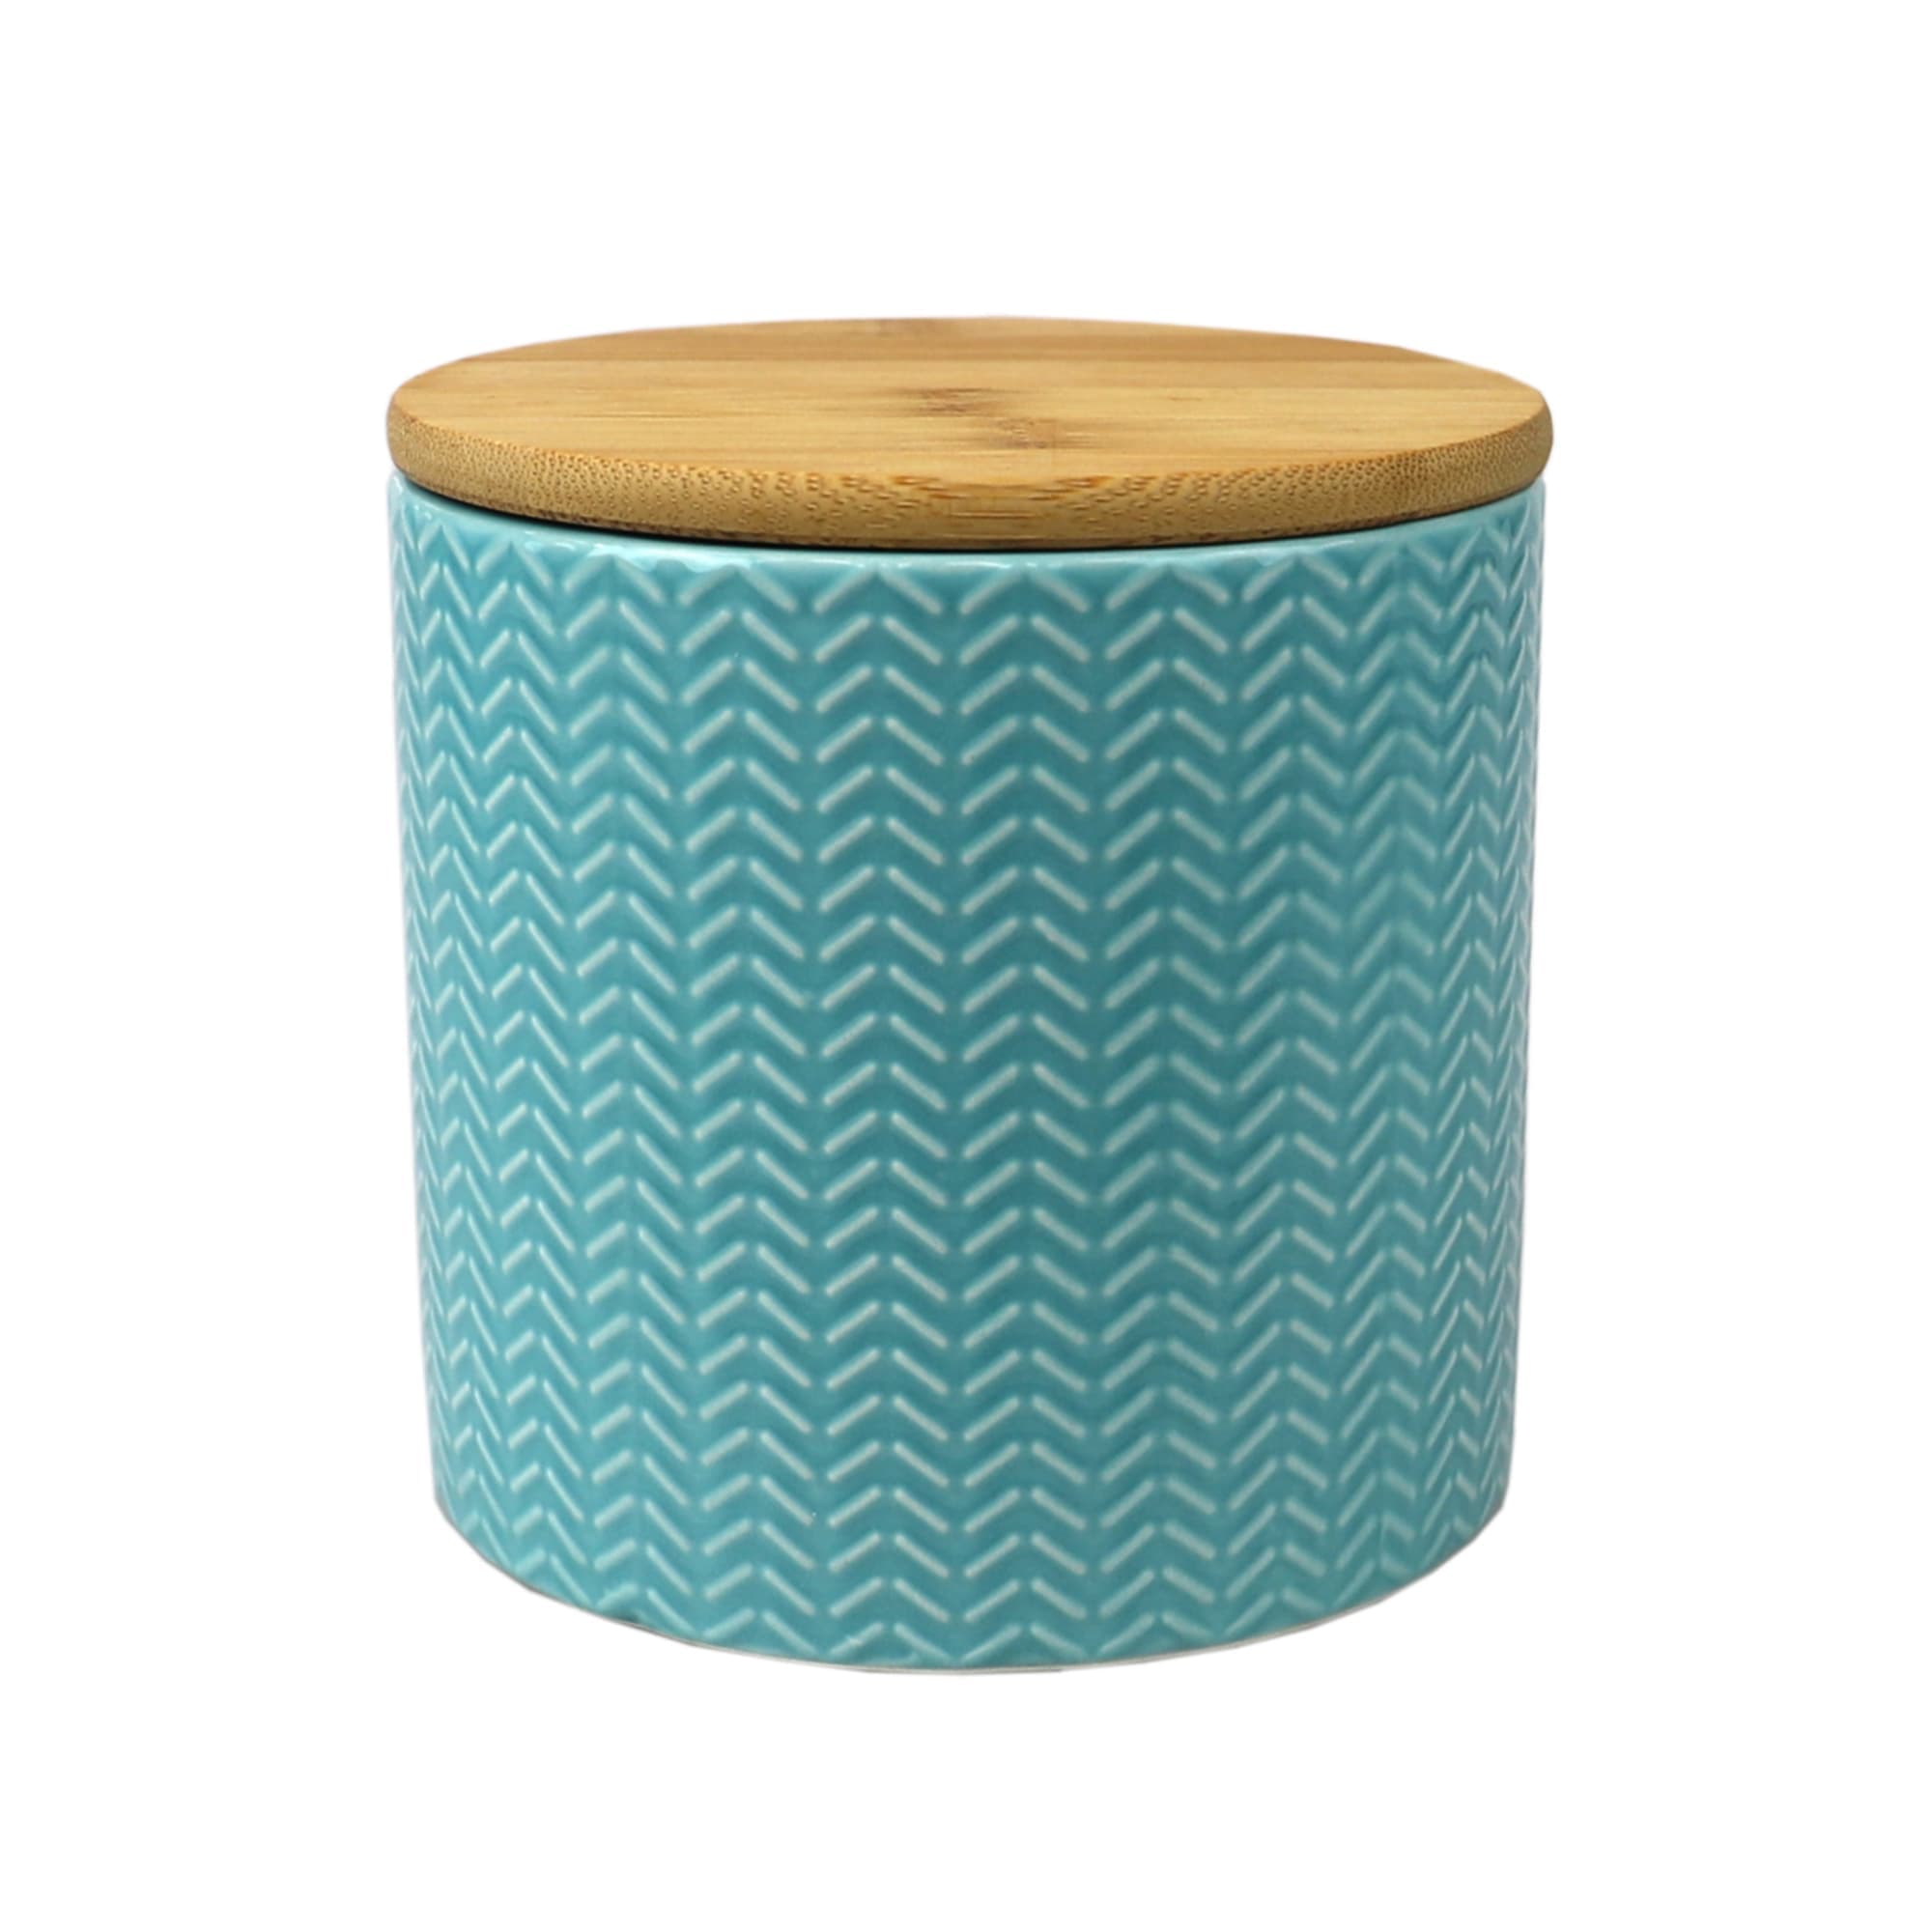 Home Basics Wave Small Ceramic Canister, Turquoise $4.00 EACH, CASE PACK OF 12